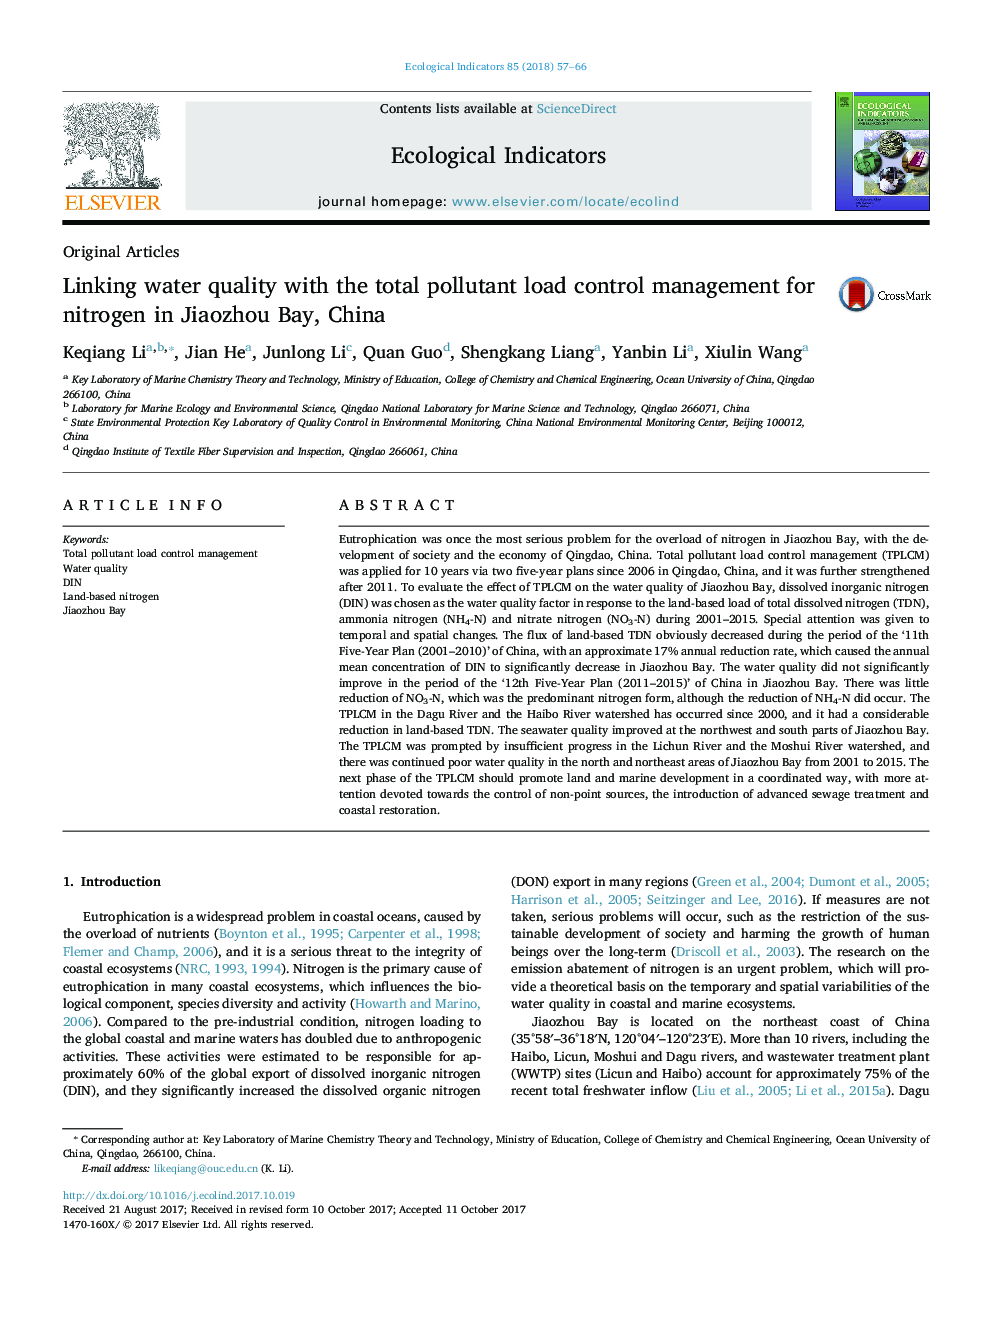 Original ArticlesLinking water quality with the total pollutant load control management for nitrogen in Jiaozhou Bay, China